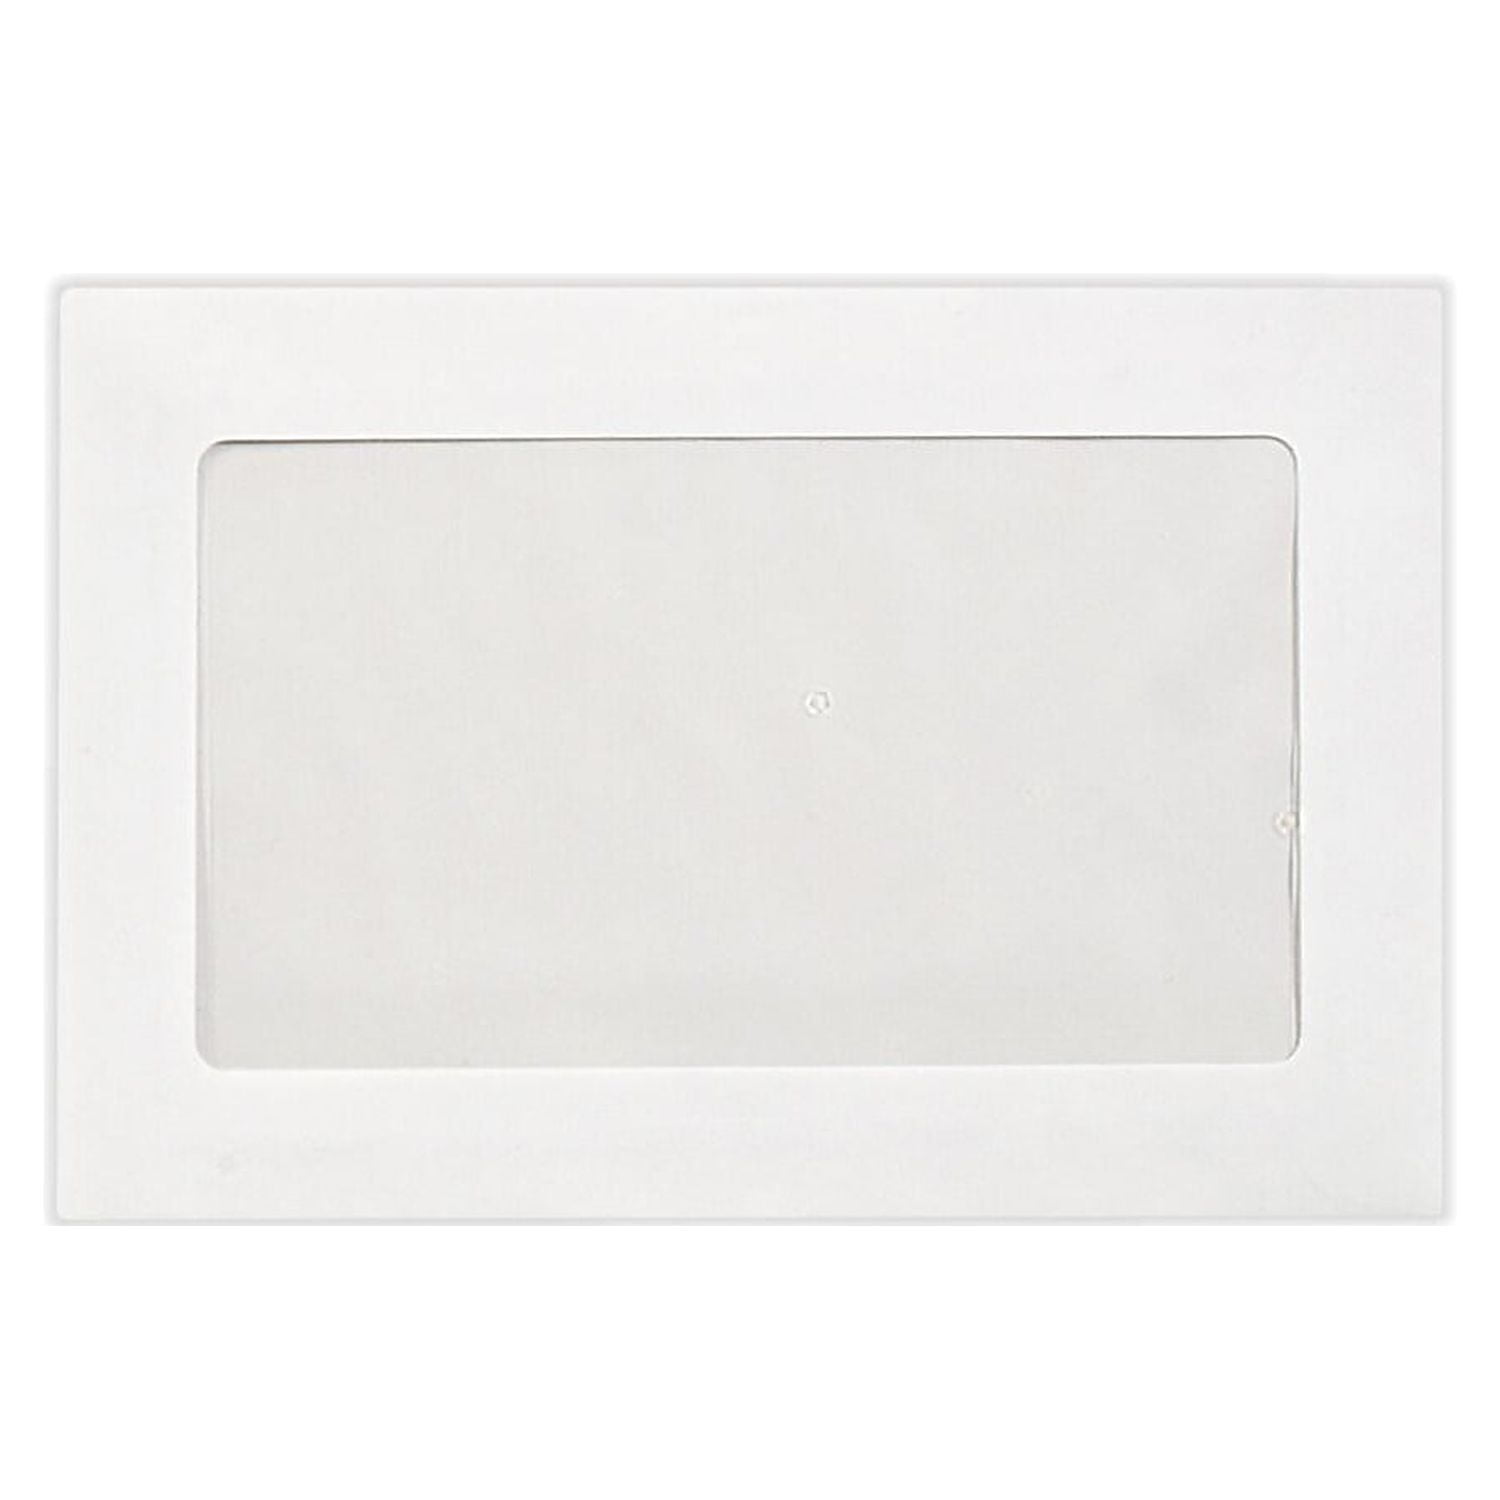 LUX 6 x 9 Full Face Window Envelopes 500/Pack 28lb. Bright White  (FFW-69-500)